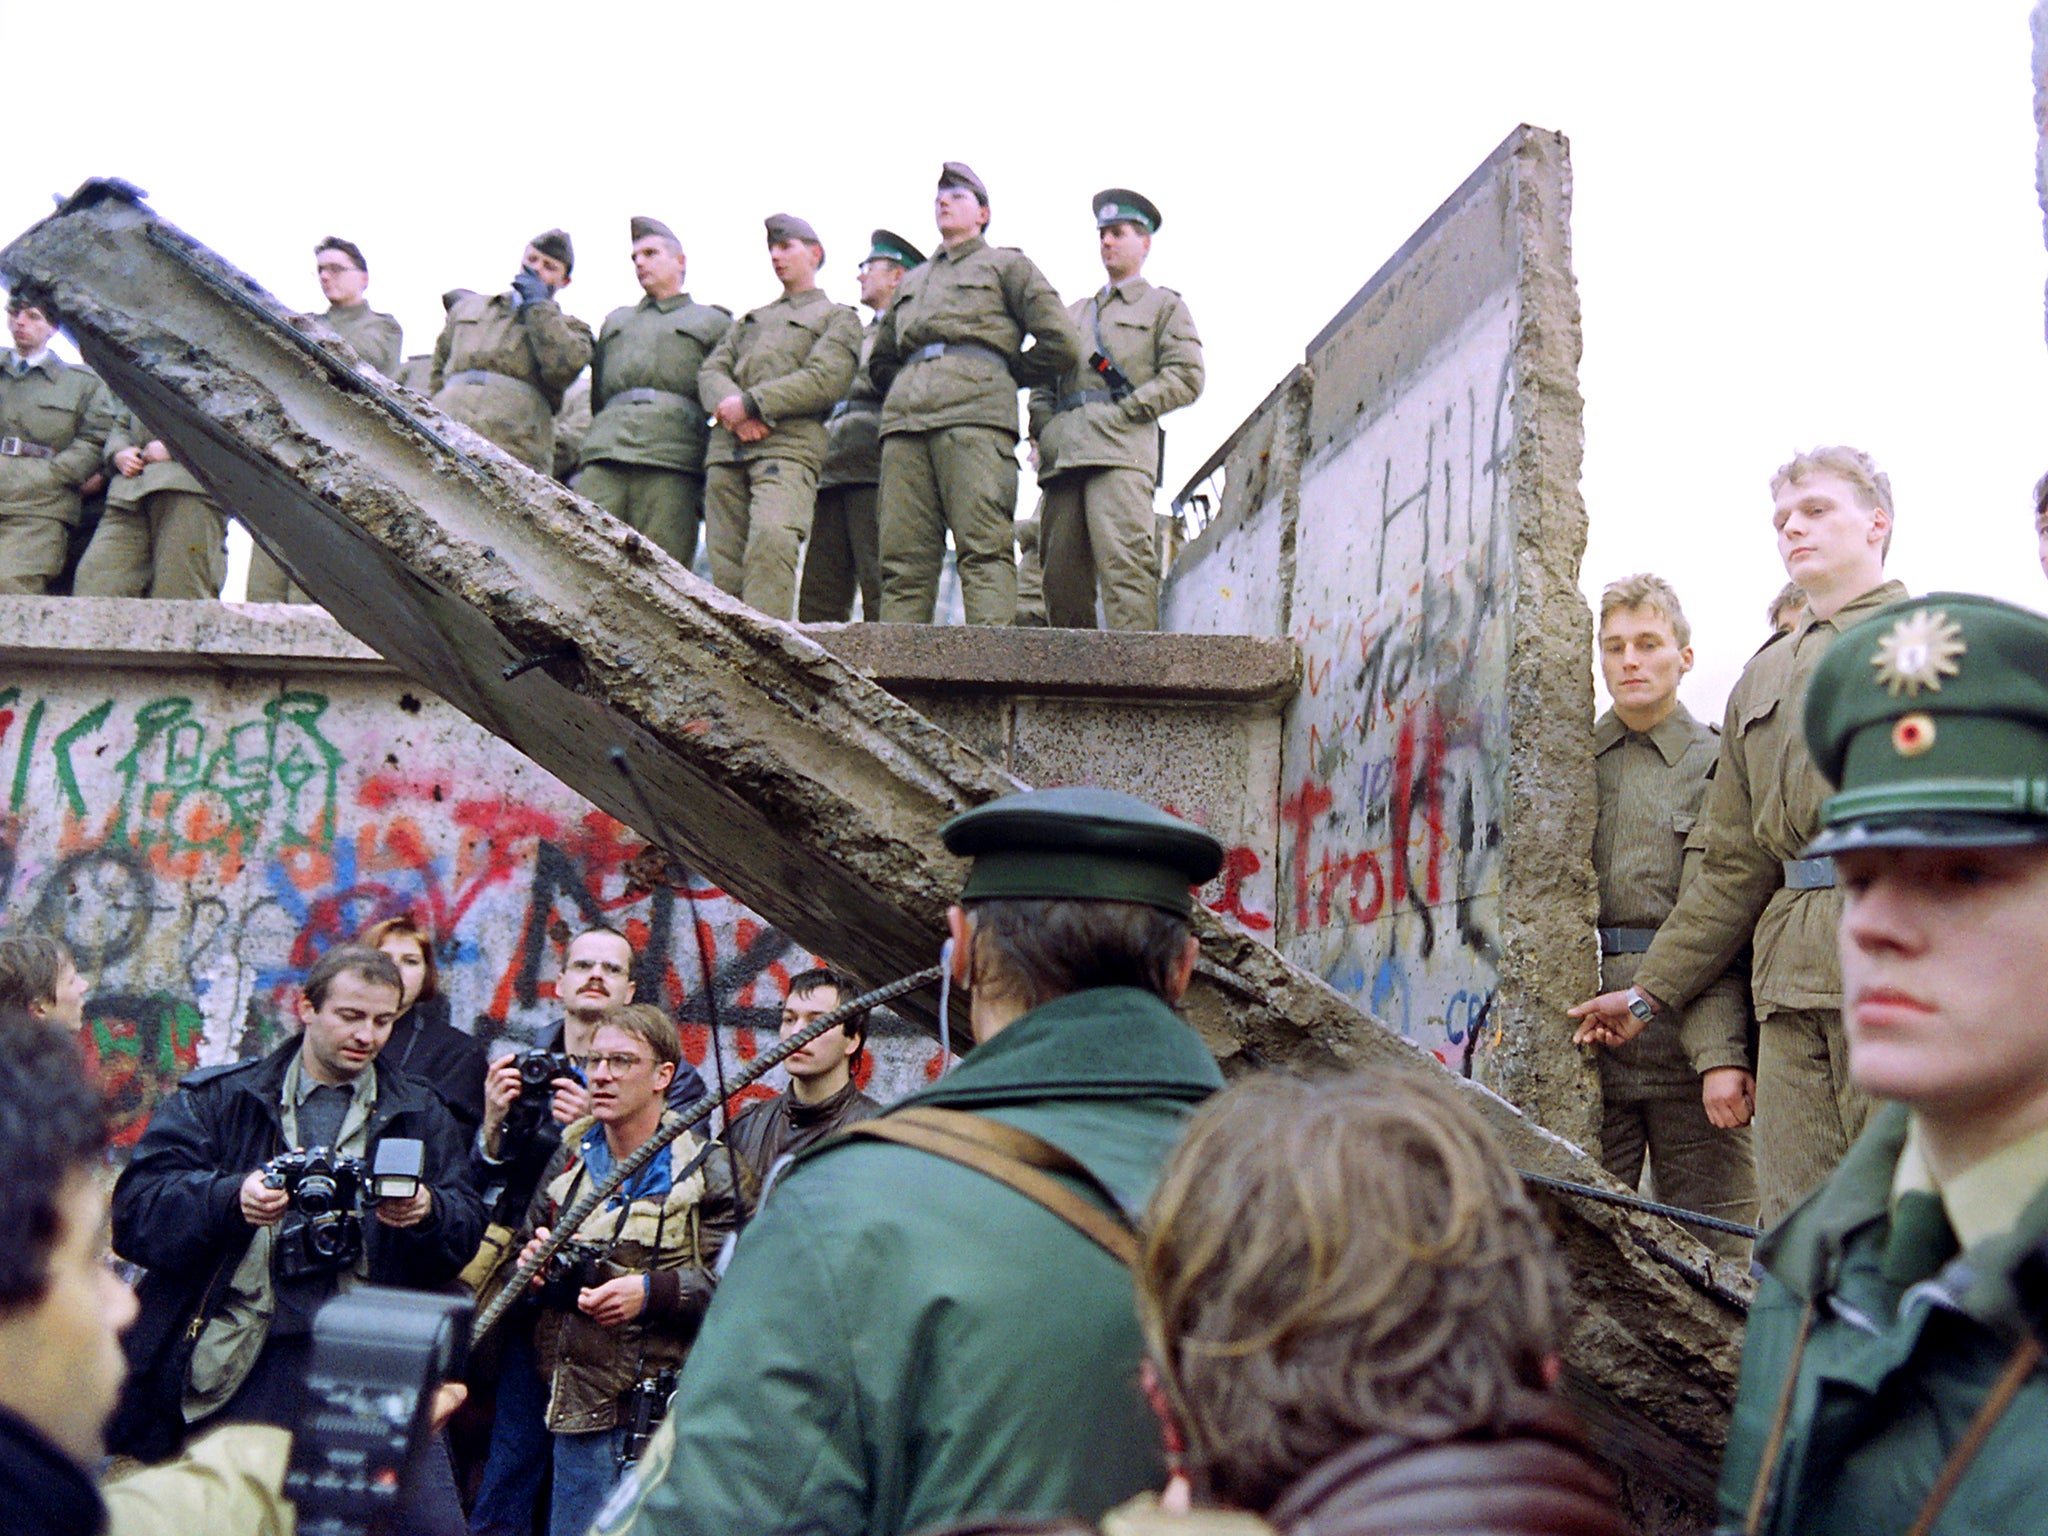 Police guard the remnants of the Berlin Wall (Getty)